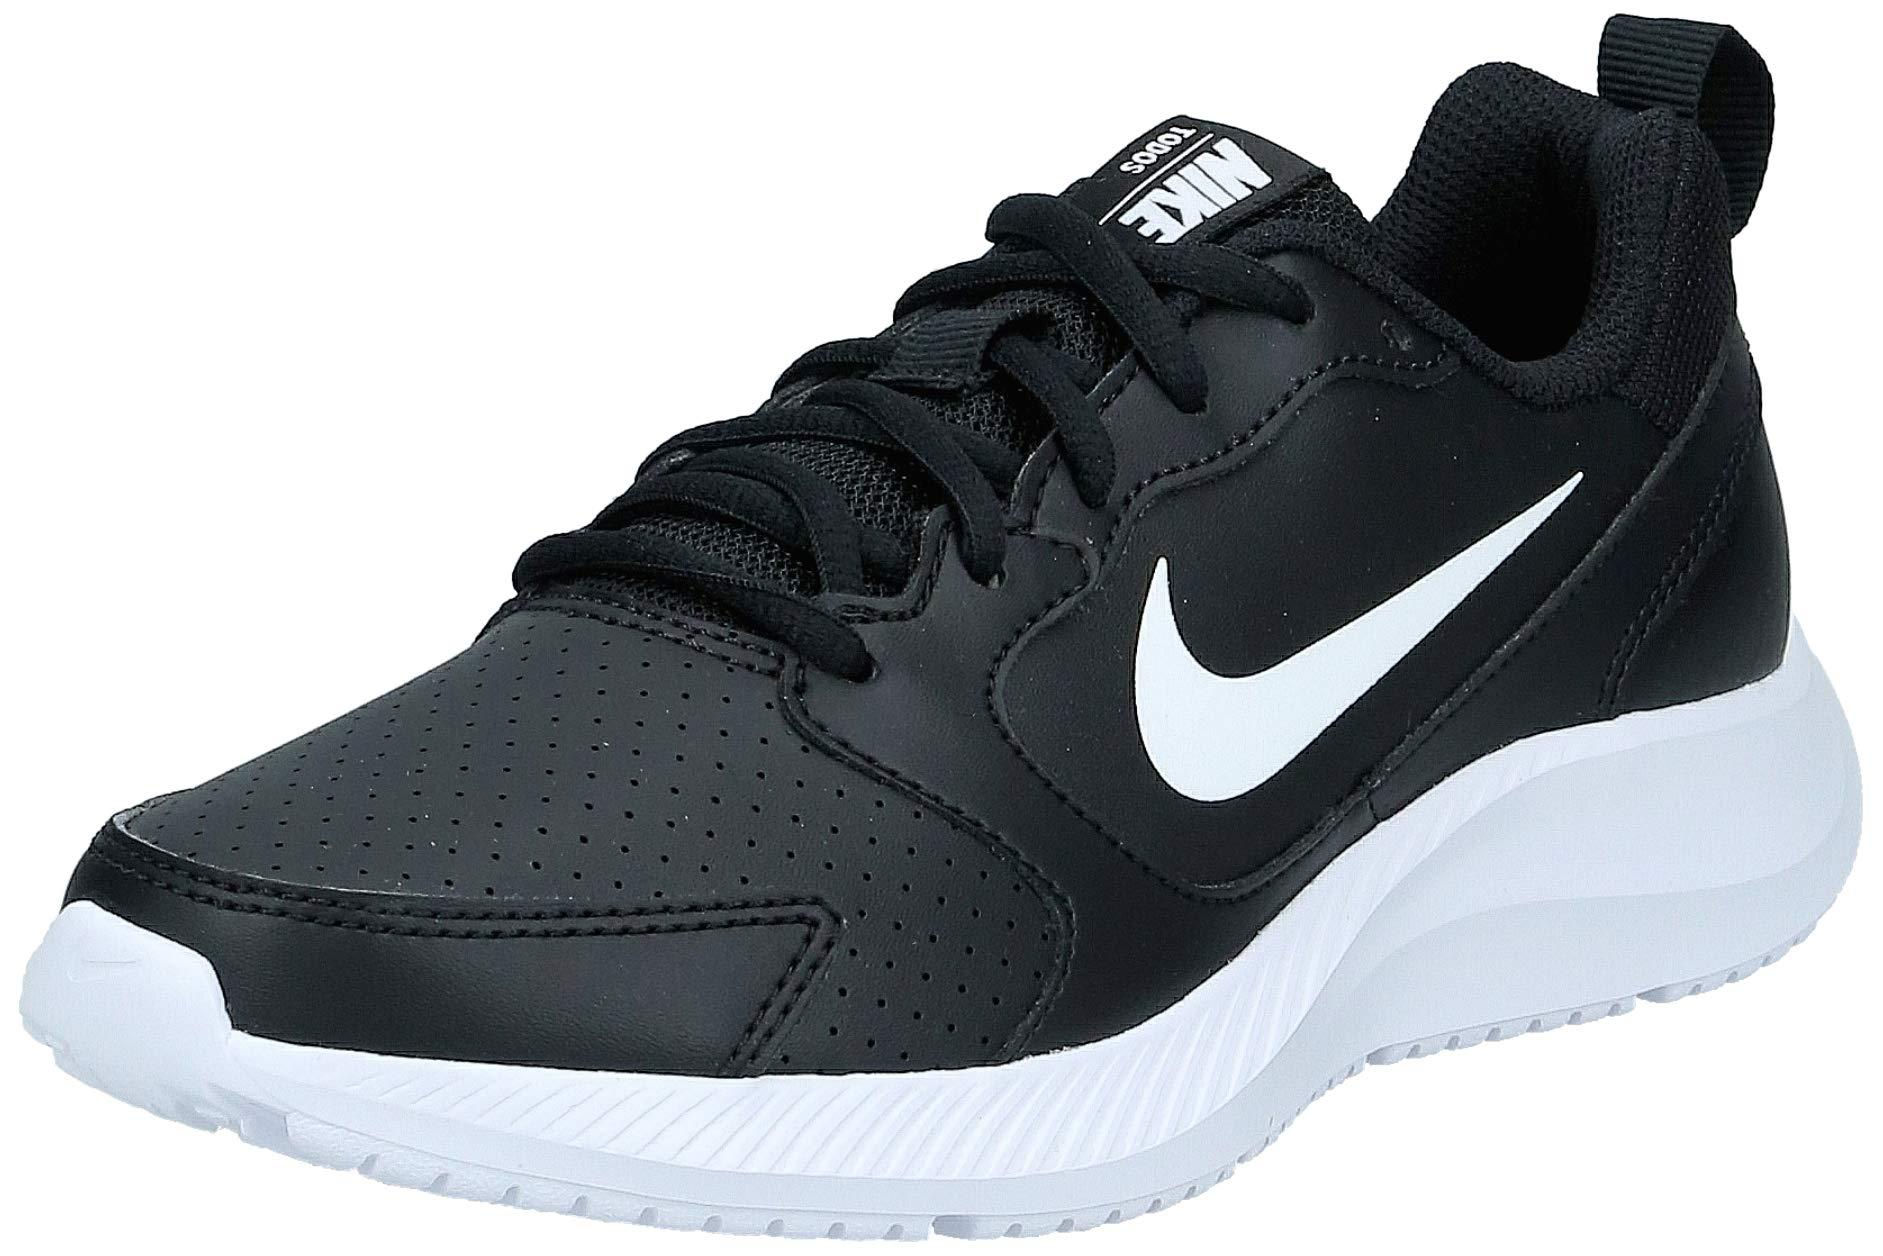 Nike Leather Todos Rn Shoe in White/Black (Black) - Lyst